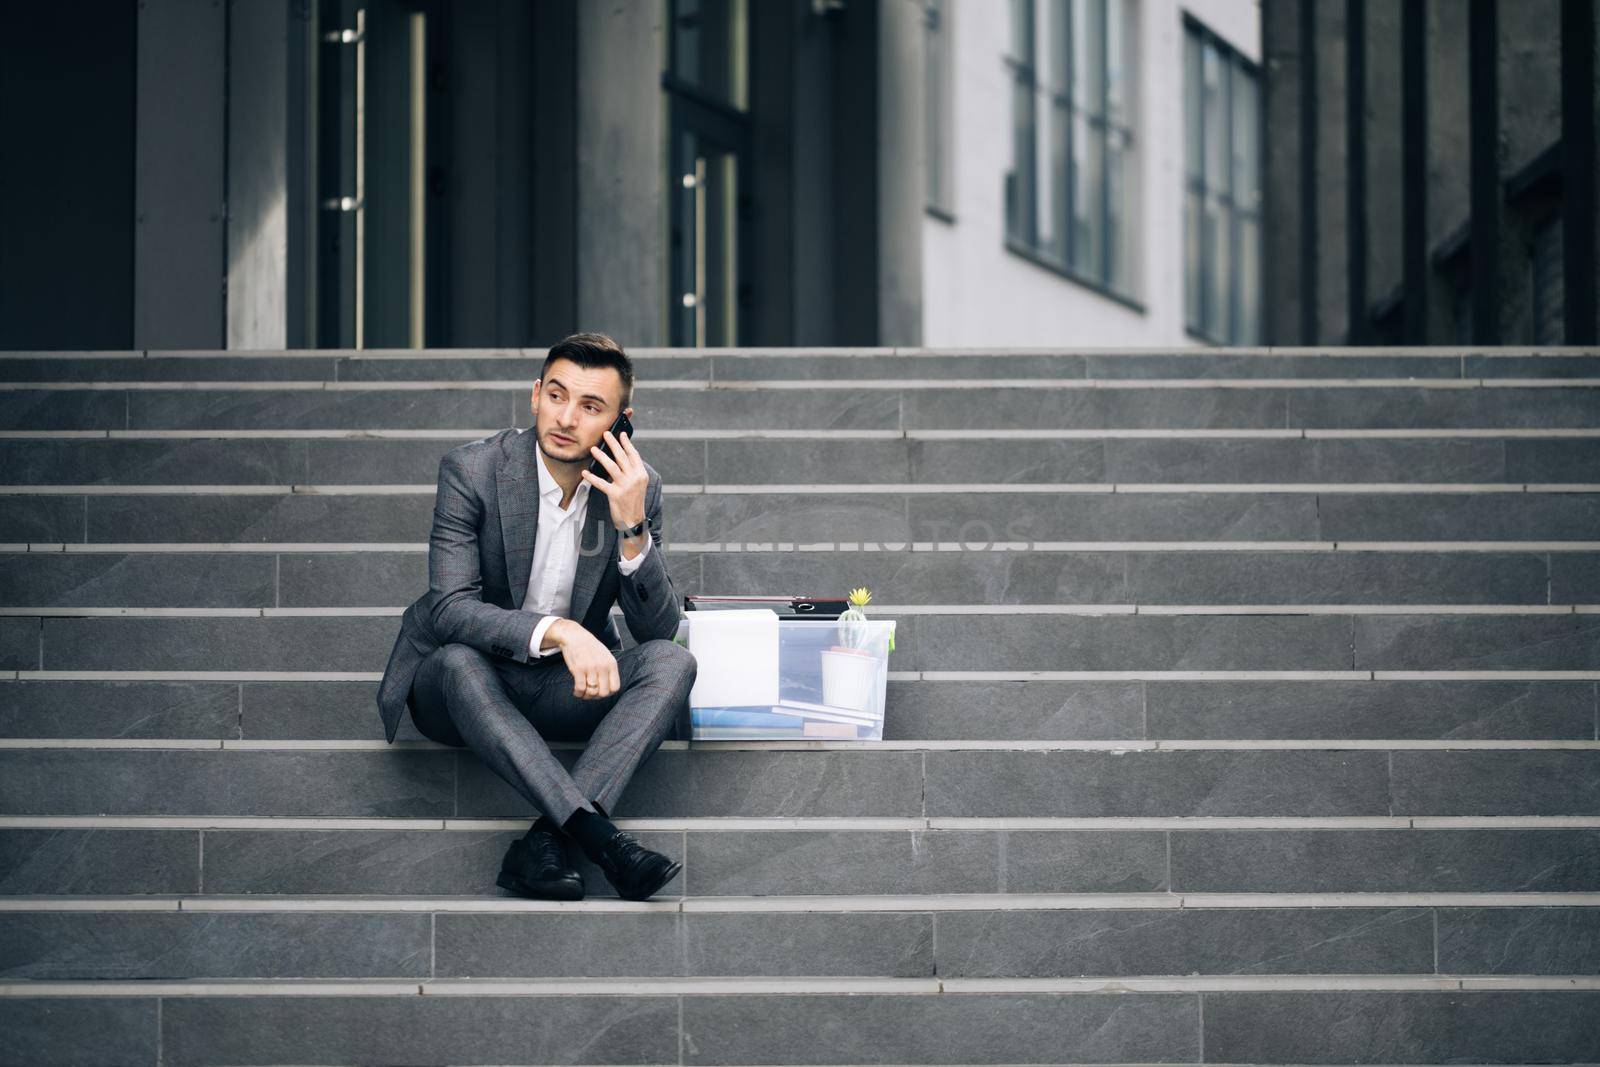 Young male jobless office worker in suit sitting on stairs outdoors. Fired man talking on phone with stuff in box. Cellphone conversation. Speaking on telephone by uflypro